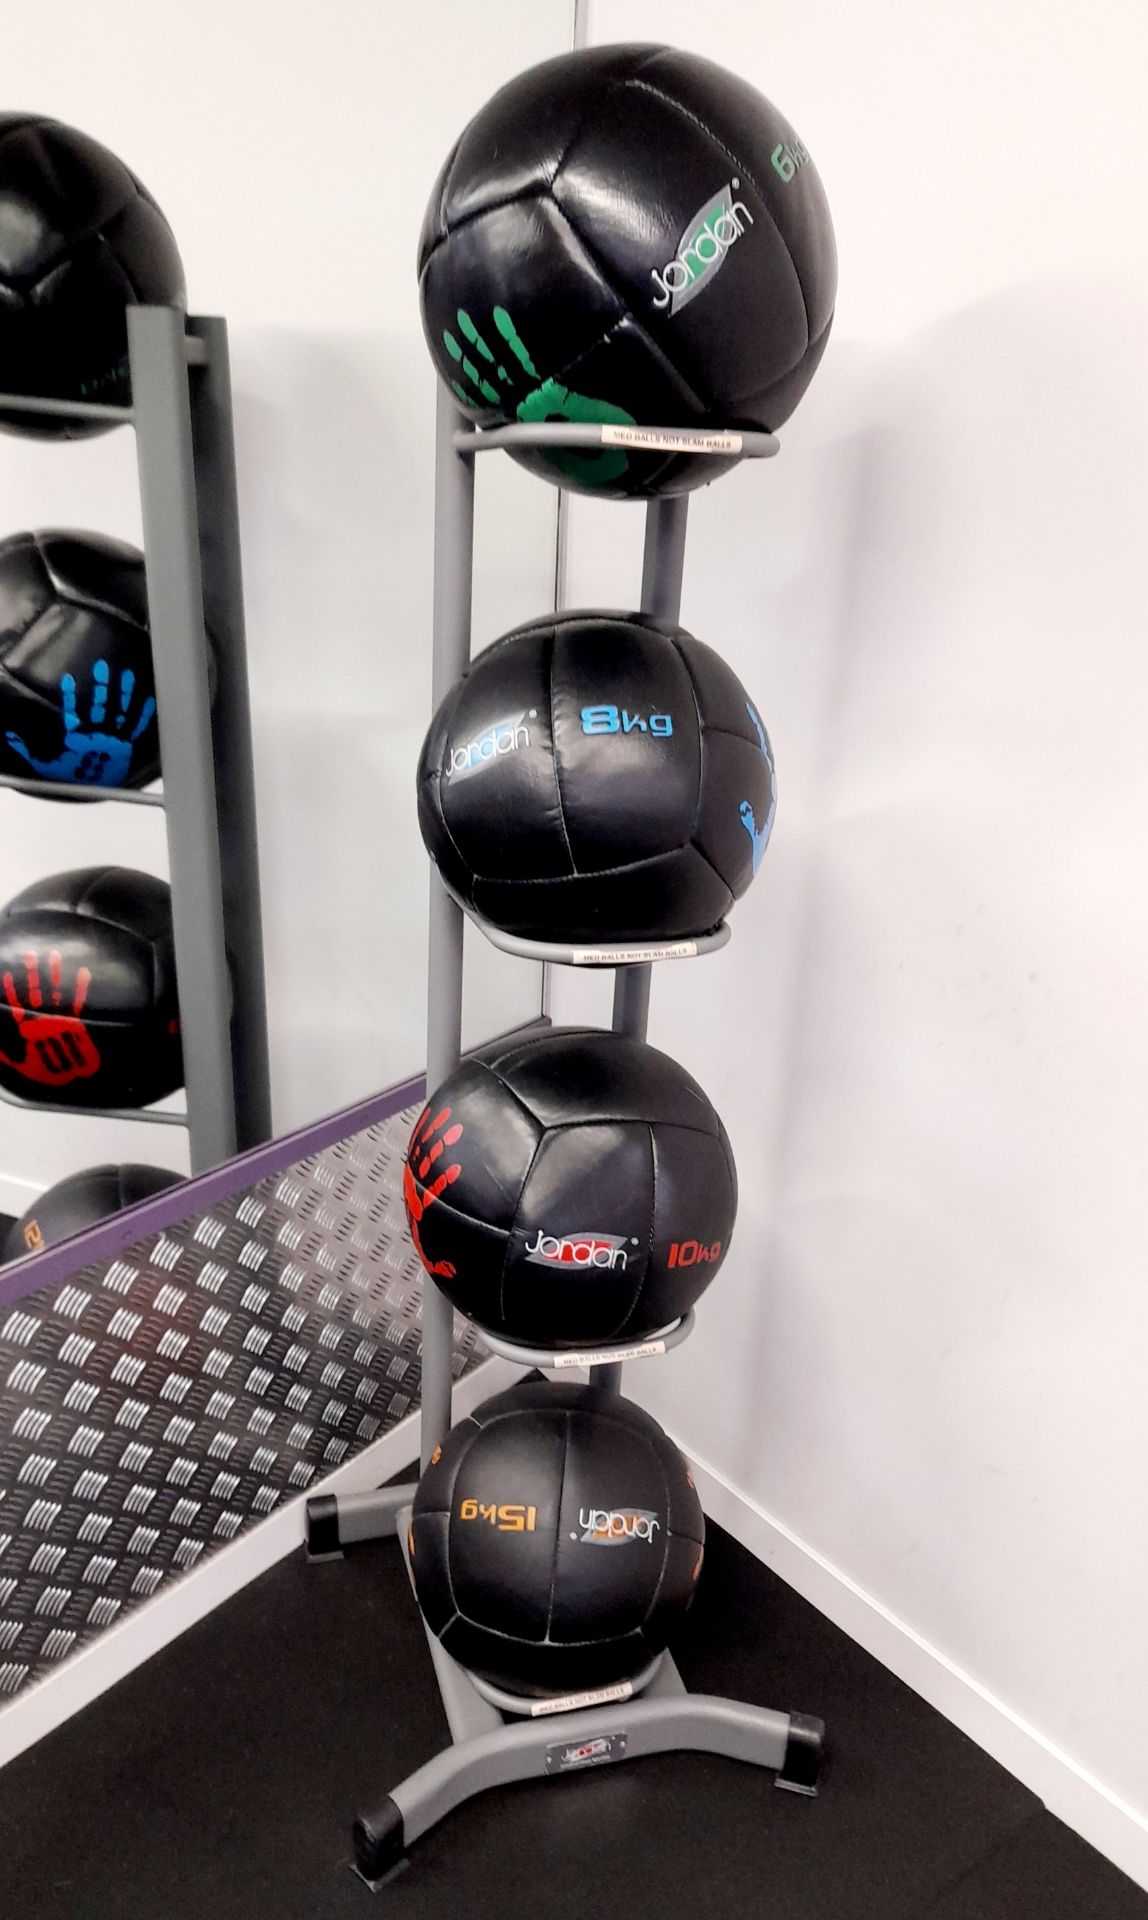 Jordan 4 x Medicine Balls 6-15kg with Stand. This auction contains a COMPOSITE LOT made up of Lots